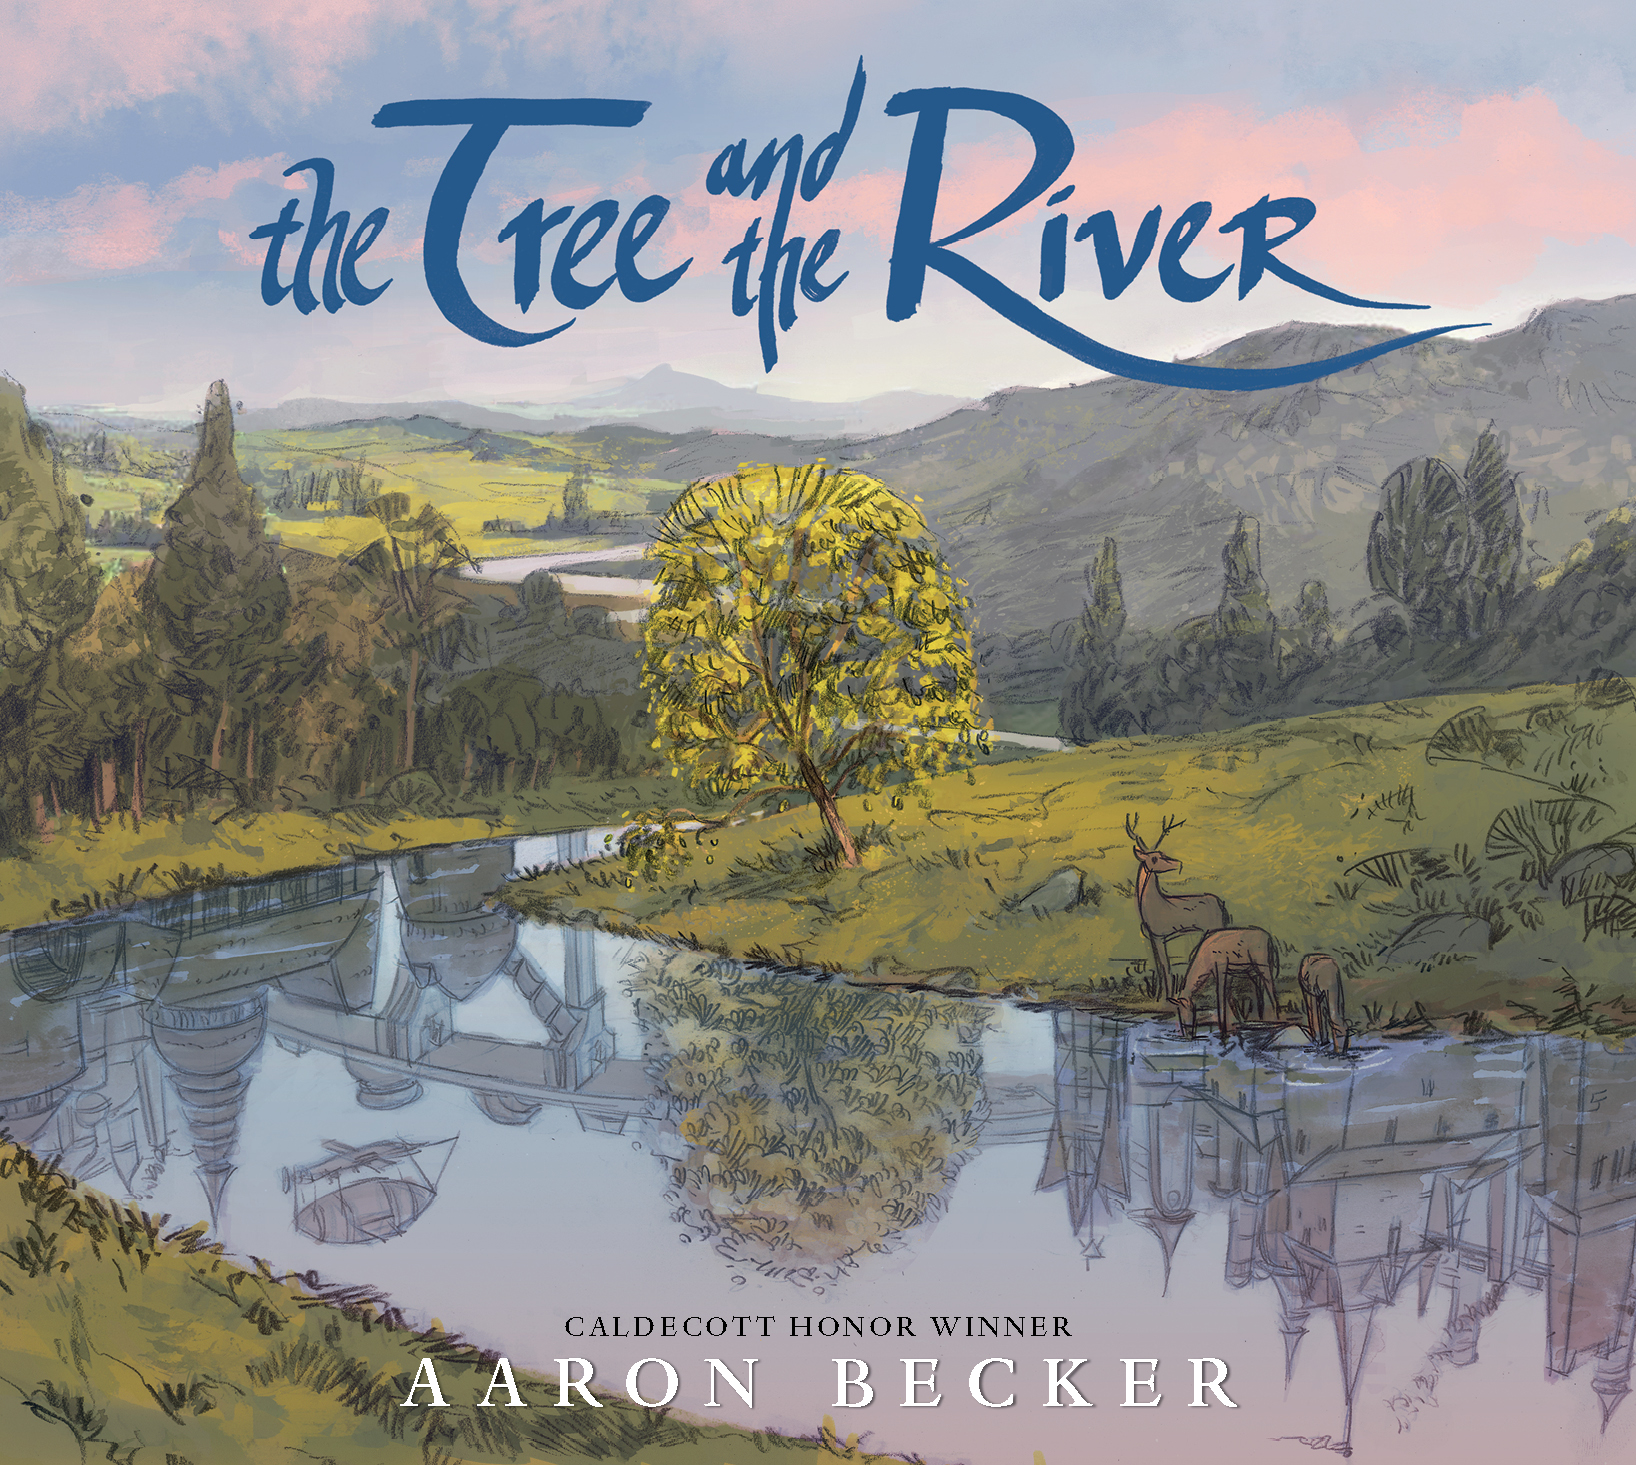 The-Tree-and-the-River